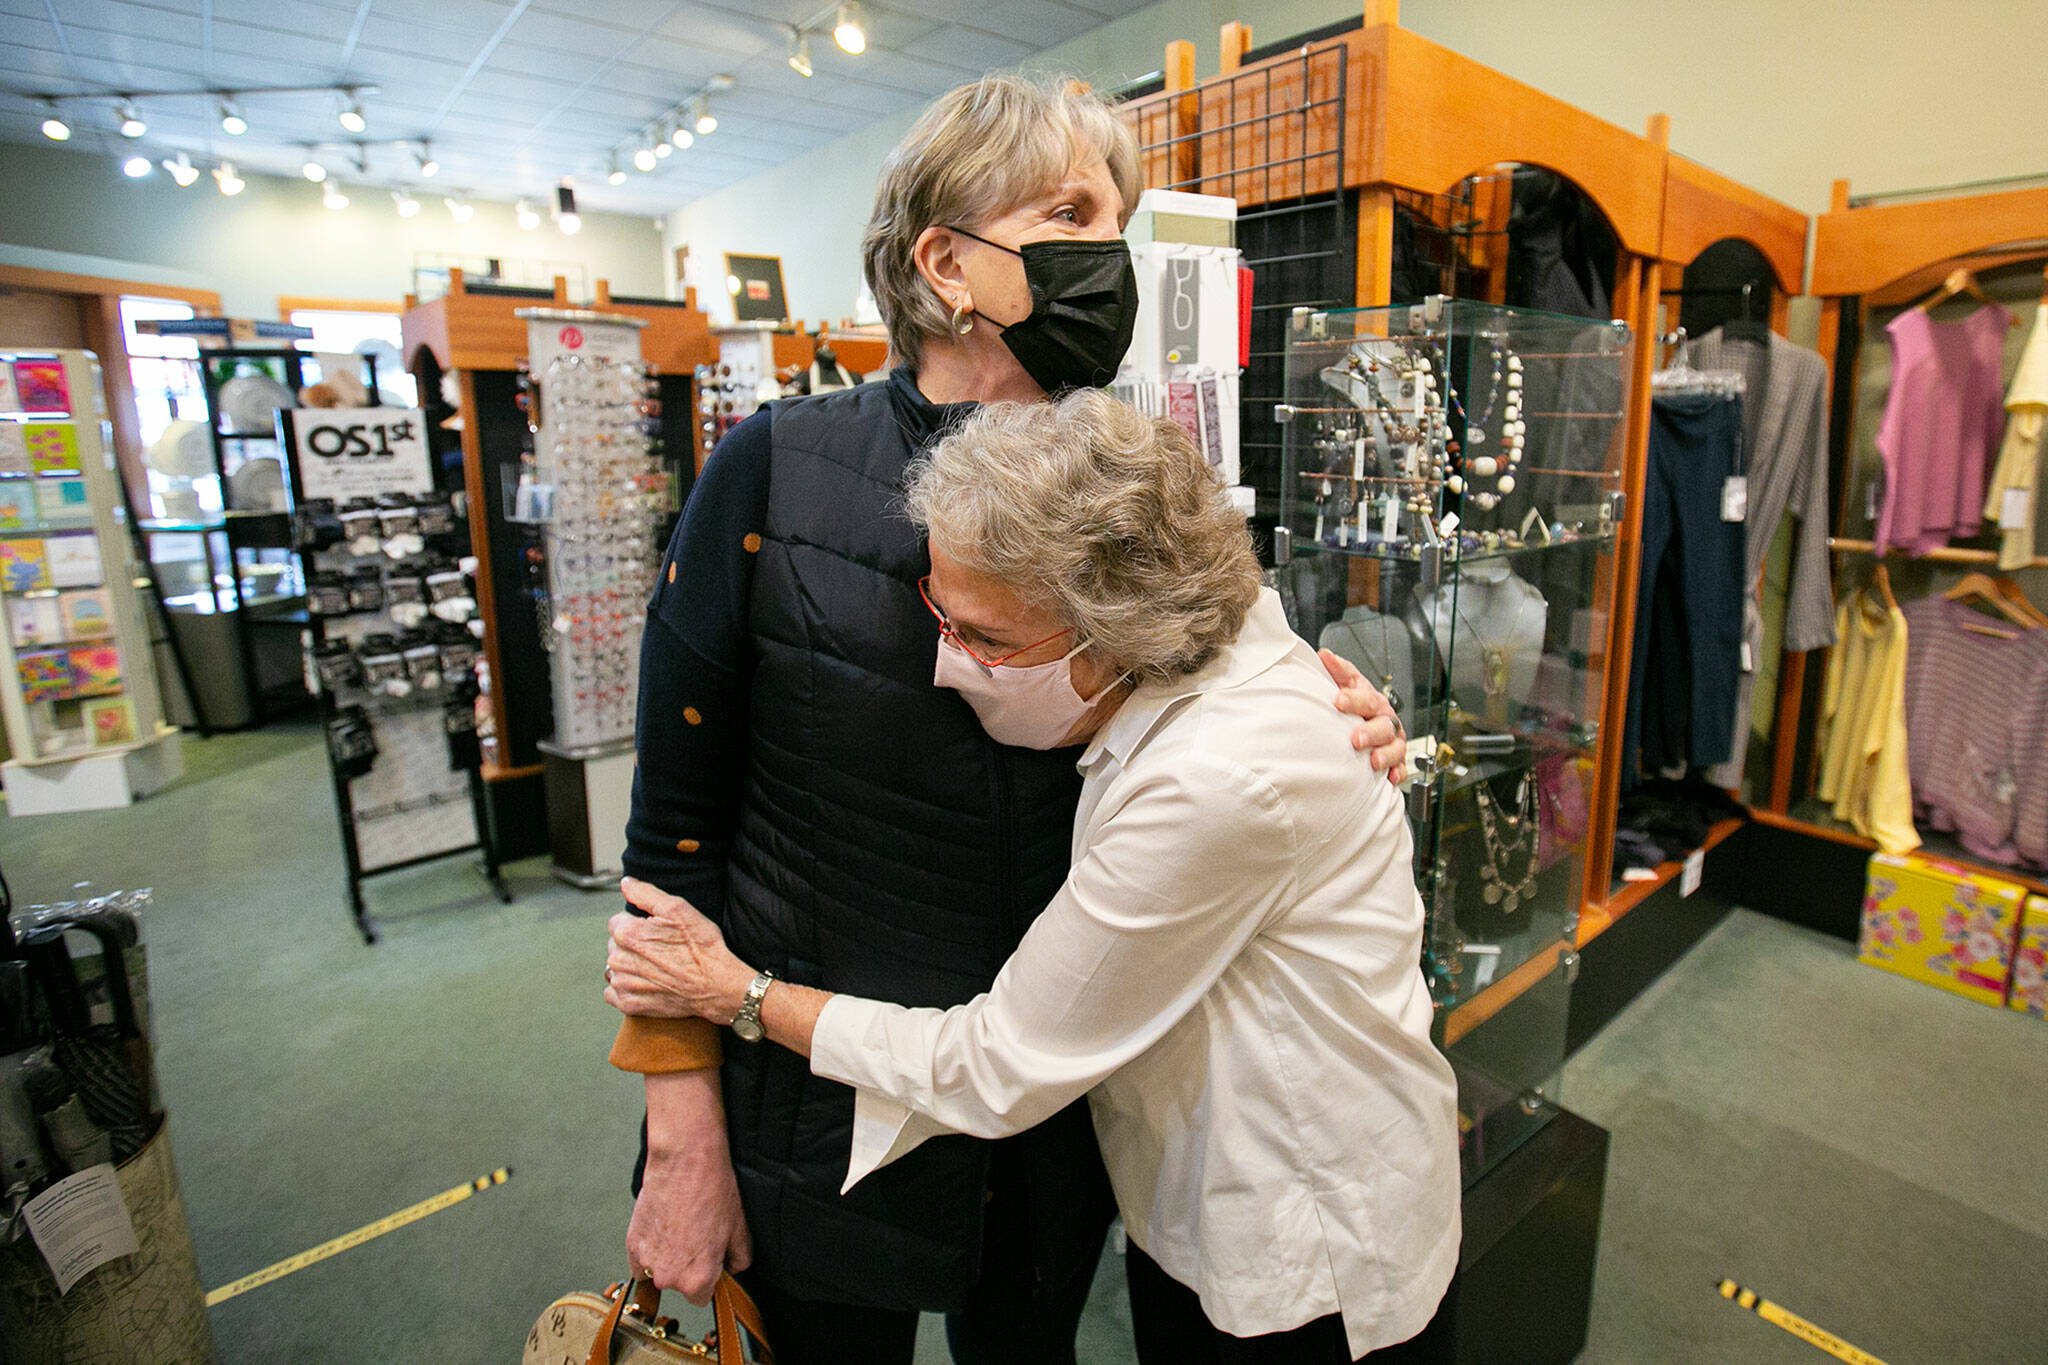 Judy Matheson hugs longtime customer Melody Taylor at J. Matheson Gifts in Everett. Matheson said she’s formed many friendships over her 31 years running the gift shop. (Ryan Berry / The Herald)